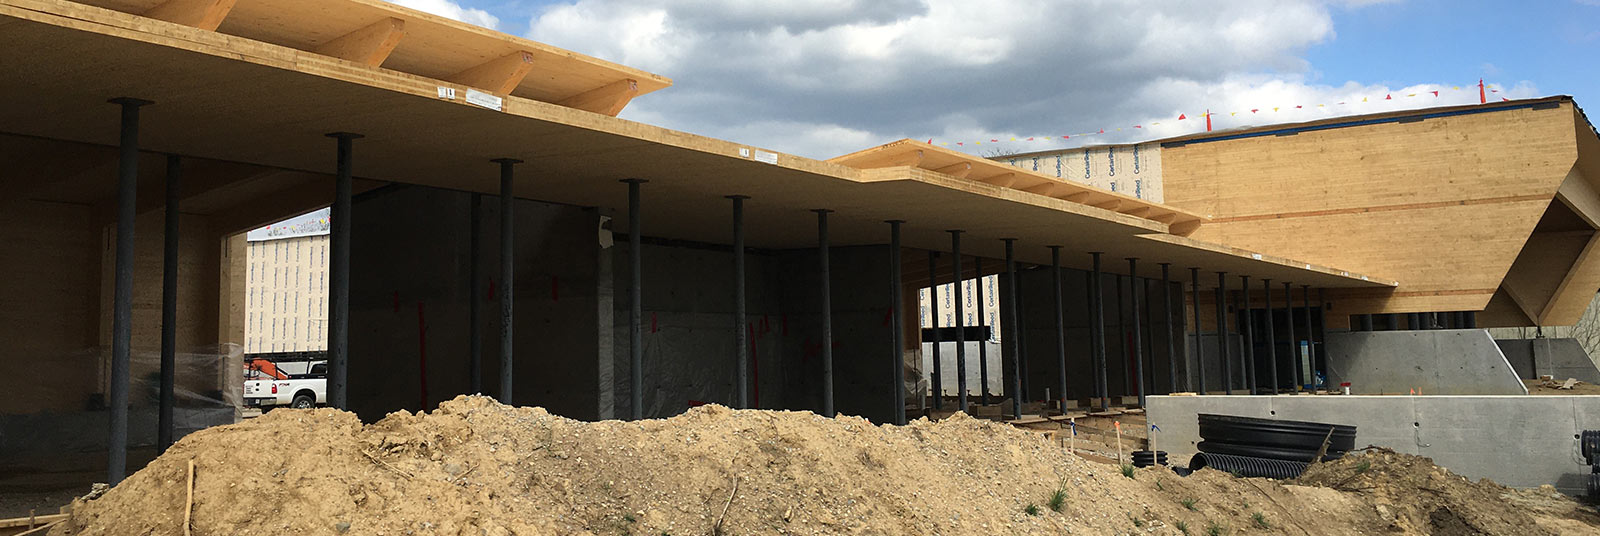 Beams to support the CLT and glulam structure at the Salvagnini addition in Hamilton, Ohio.